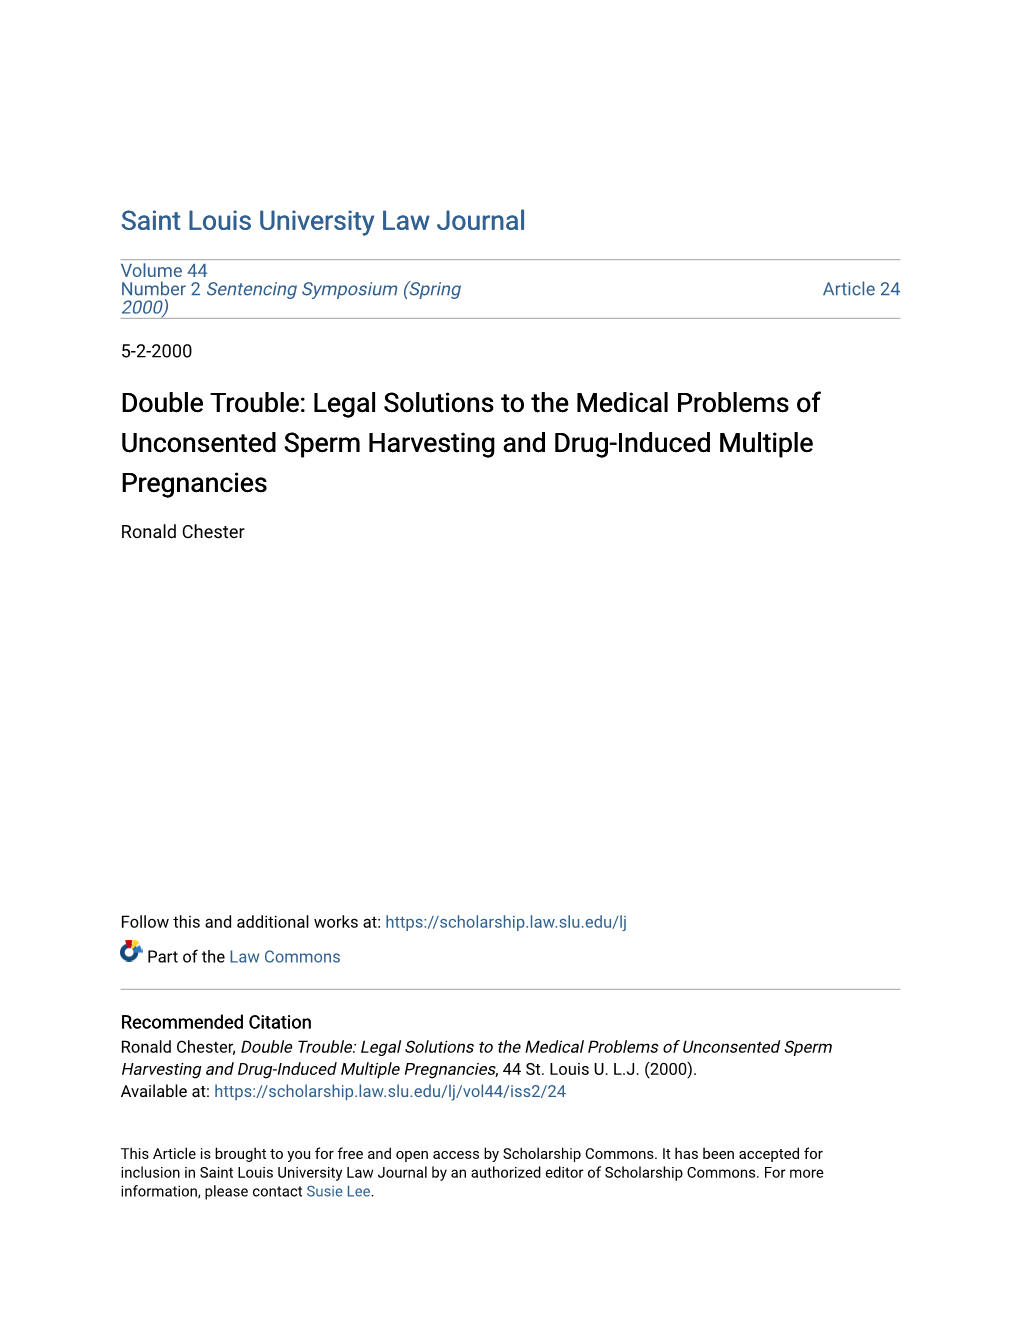 Legal Solutions to the Medical Problems of Unconsented Sperm Harvesting and Drug-Induced Multiple Pregnancies